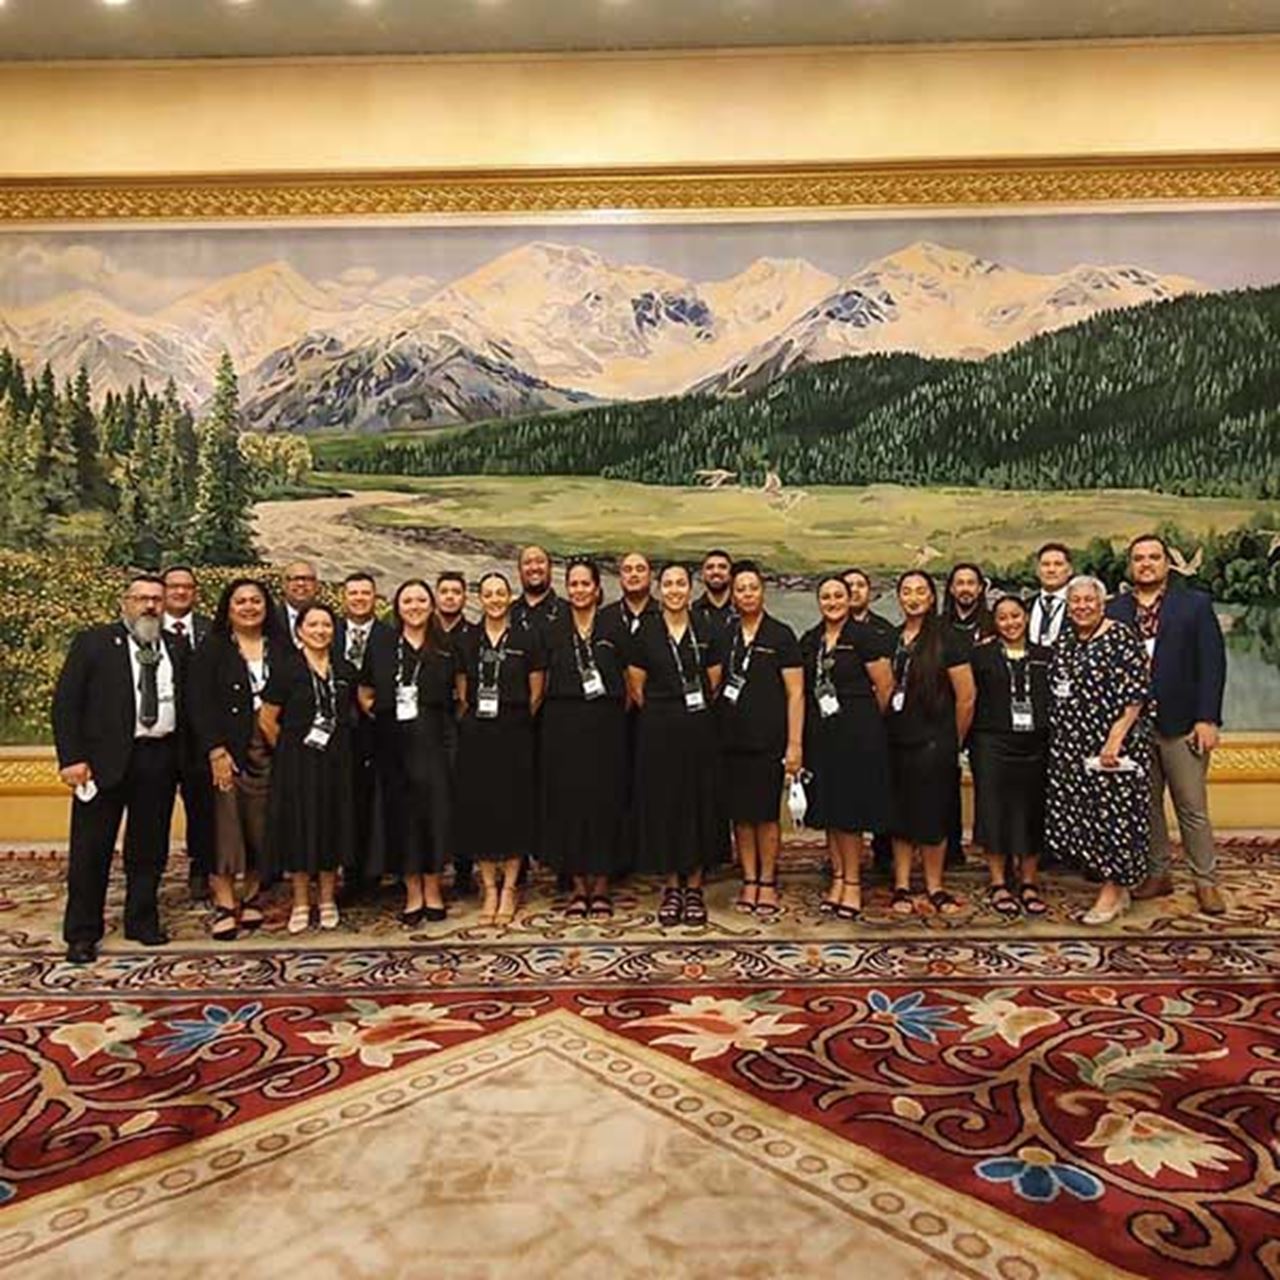 Apanui and NZ delegation at Great Hall of the Peoples, China